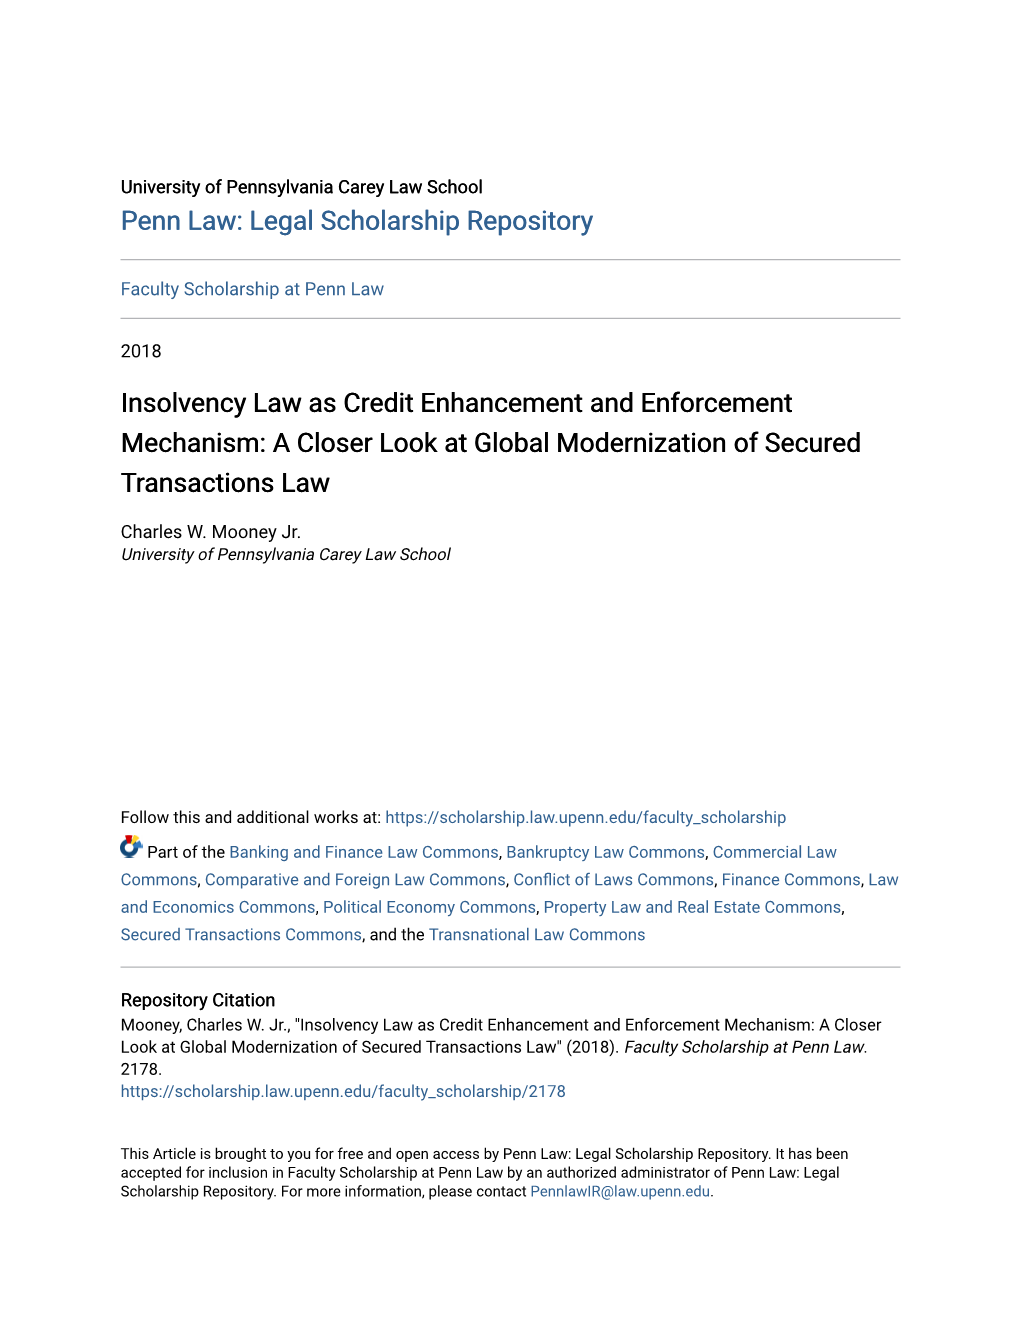 Insolvency Law As Credit Enhancement and Enforcement Mechanism: a Closer Look at Global Modernization of Secured Transactions Law